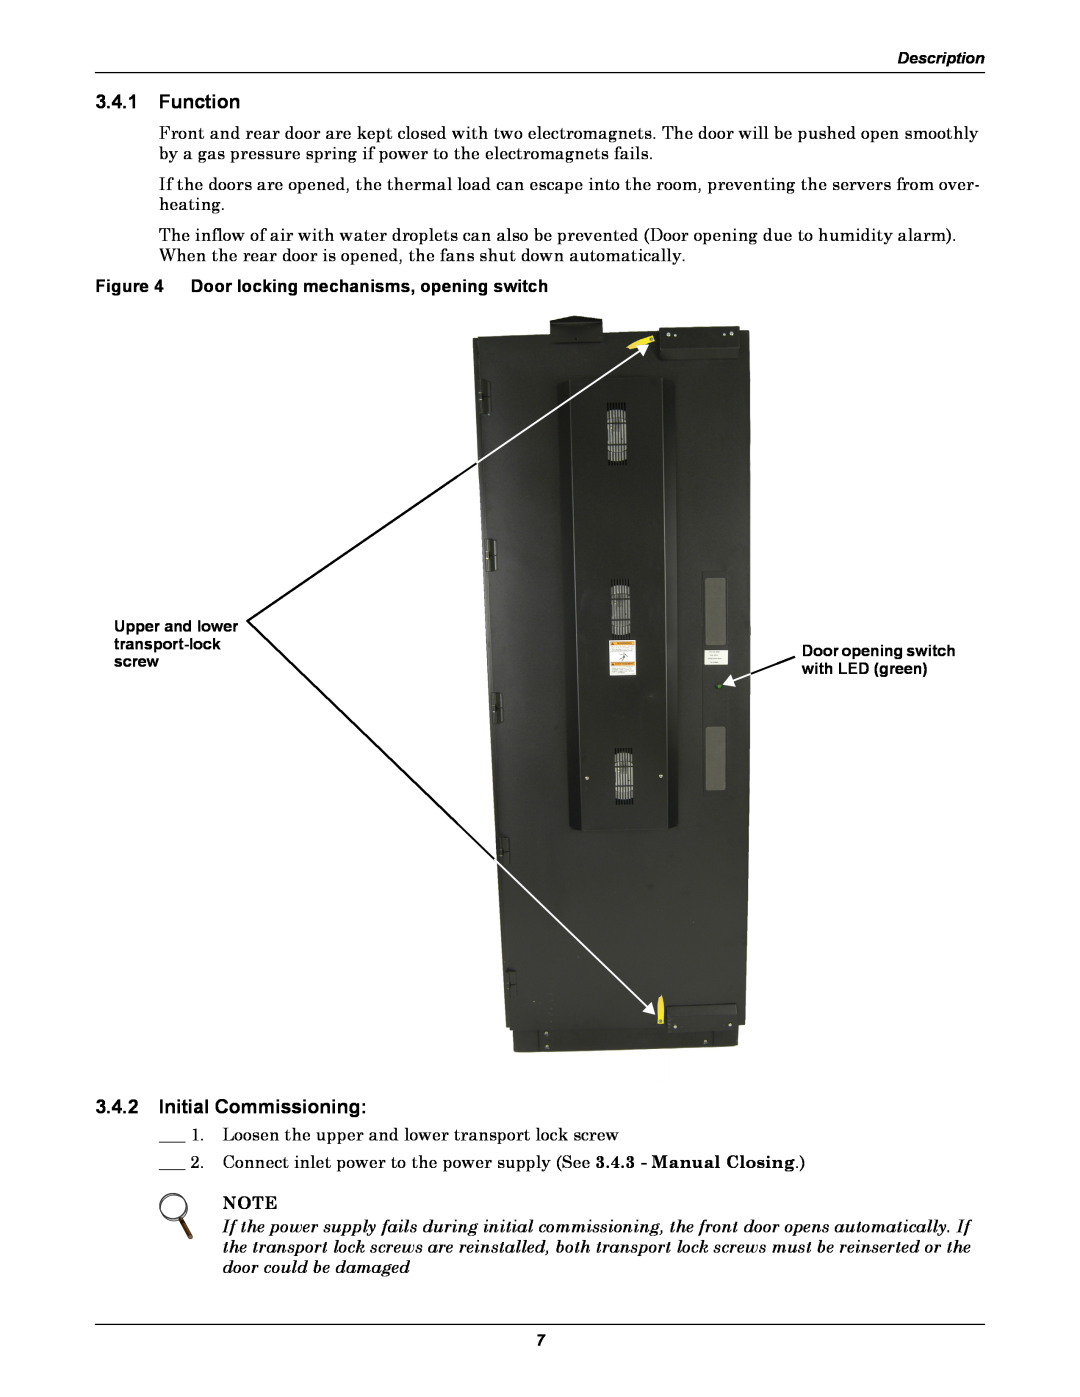 Liebert XDK user manual Function, Initial Commissioning, Door locking mechanisms, opening switch 